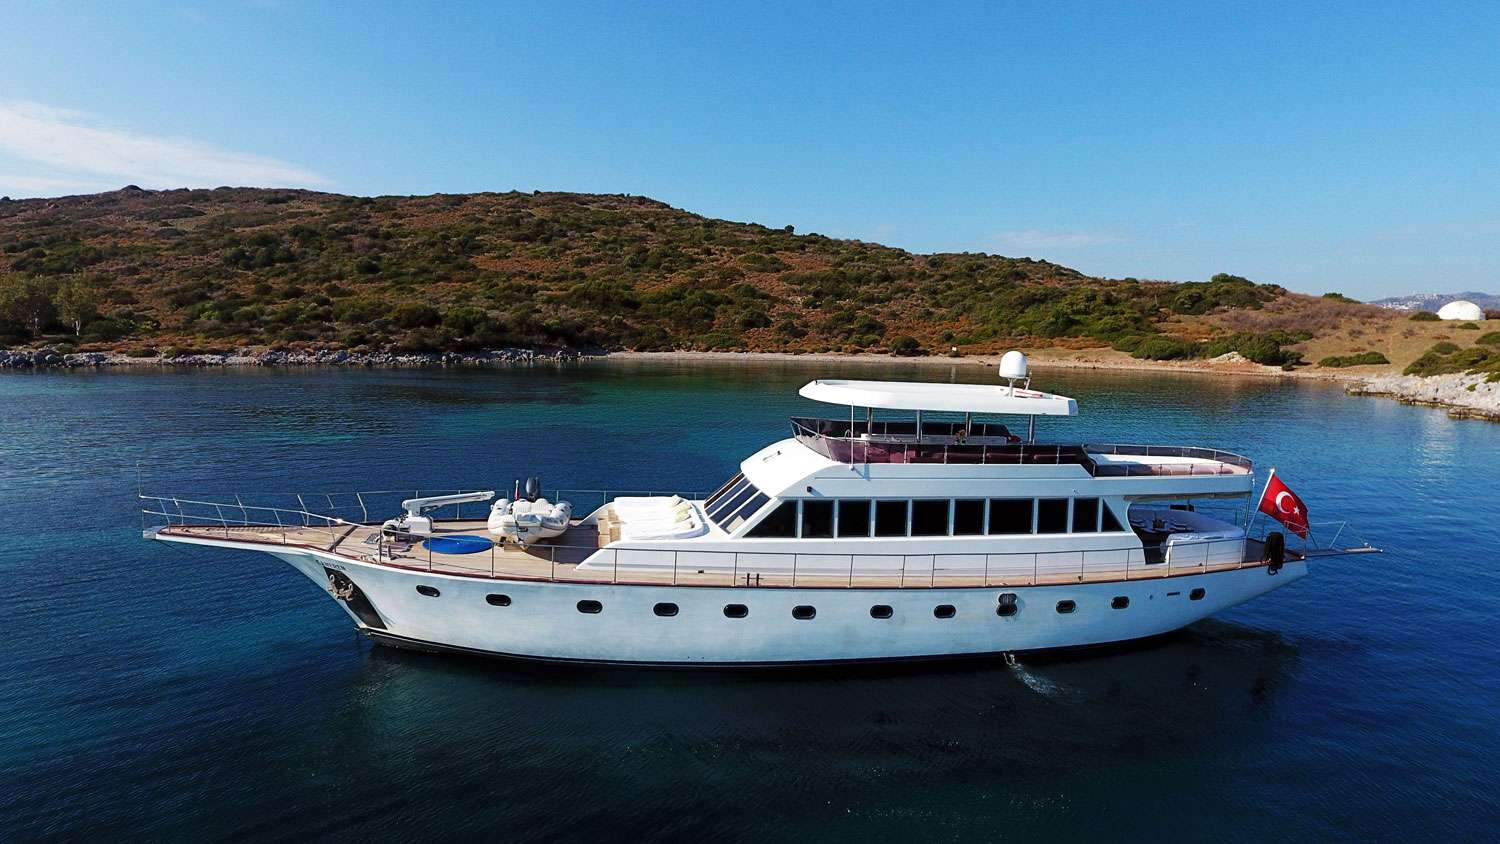 CANEREN - Yacht Charter Cesme & Boat hire in Greece & Turkey 1